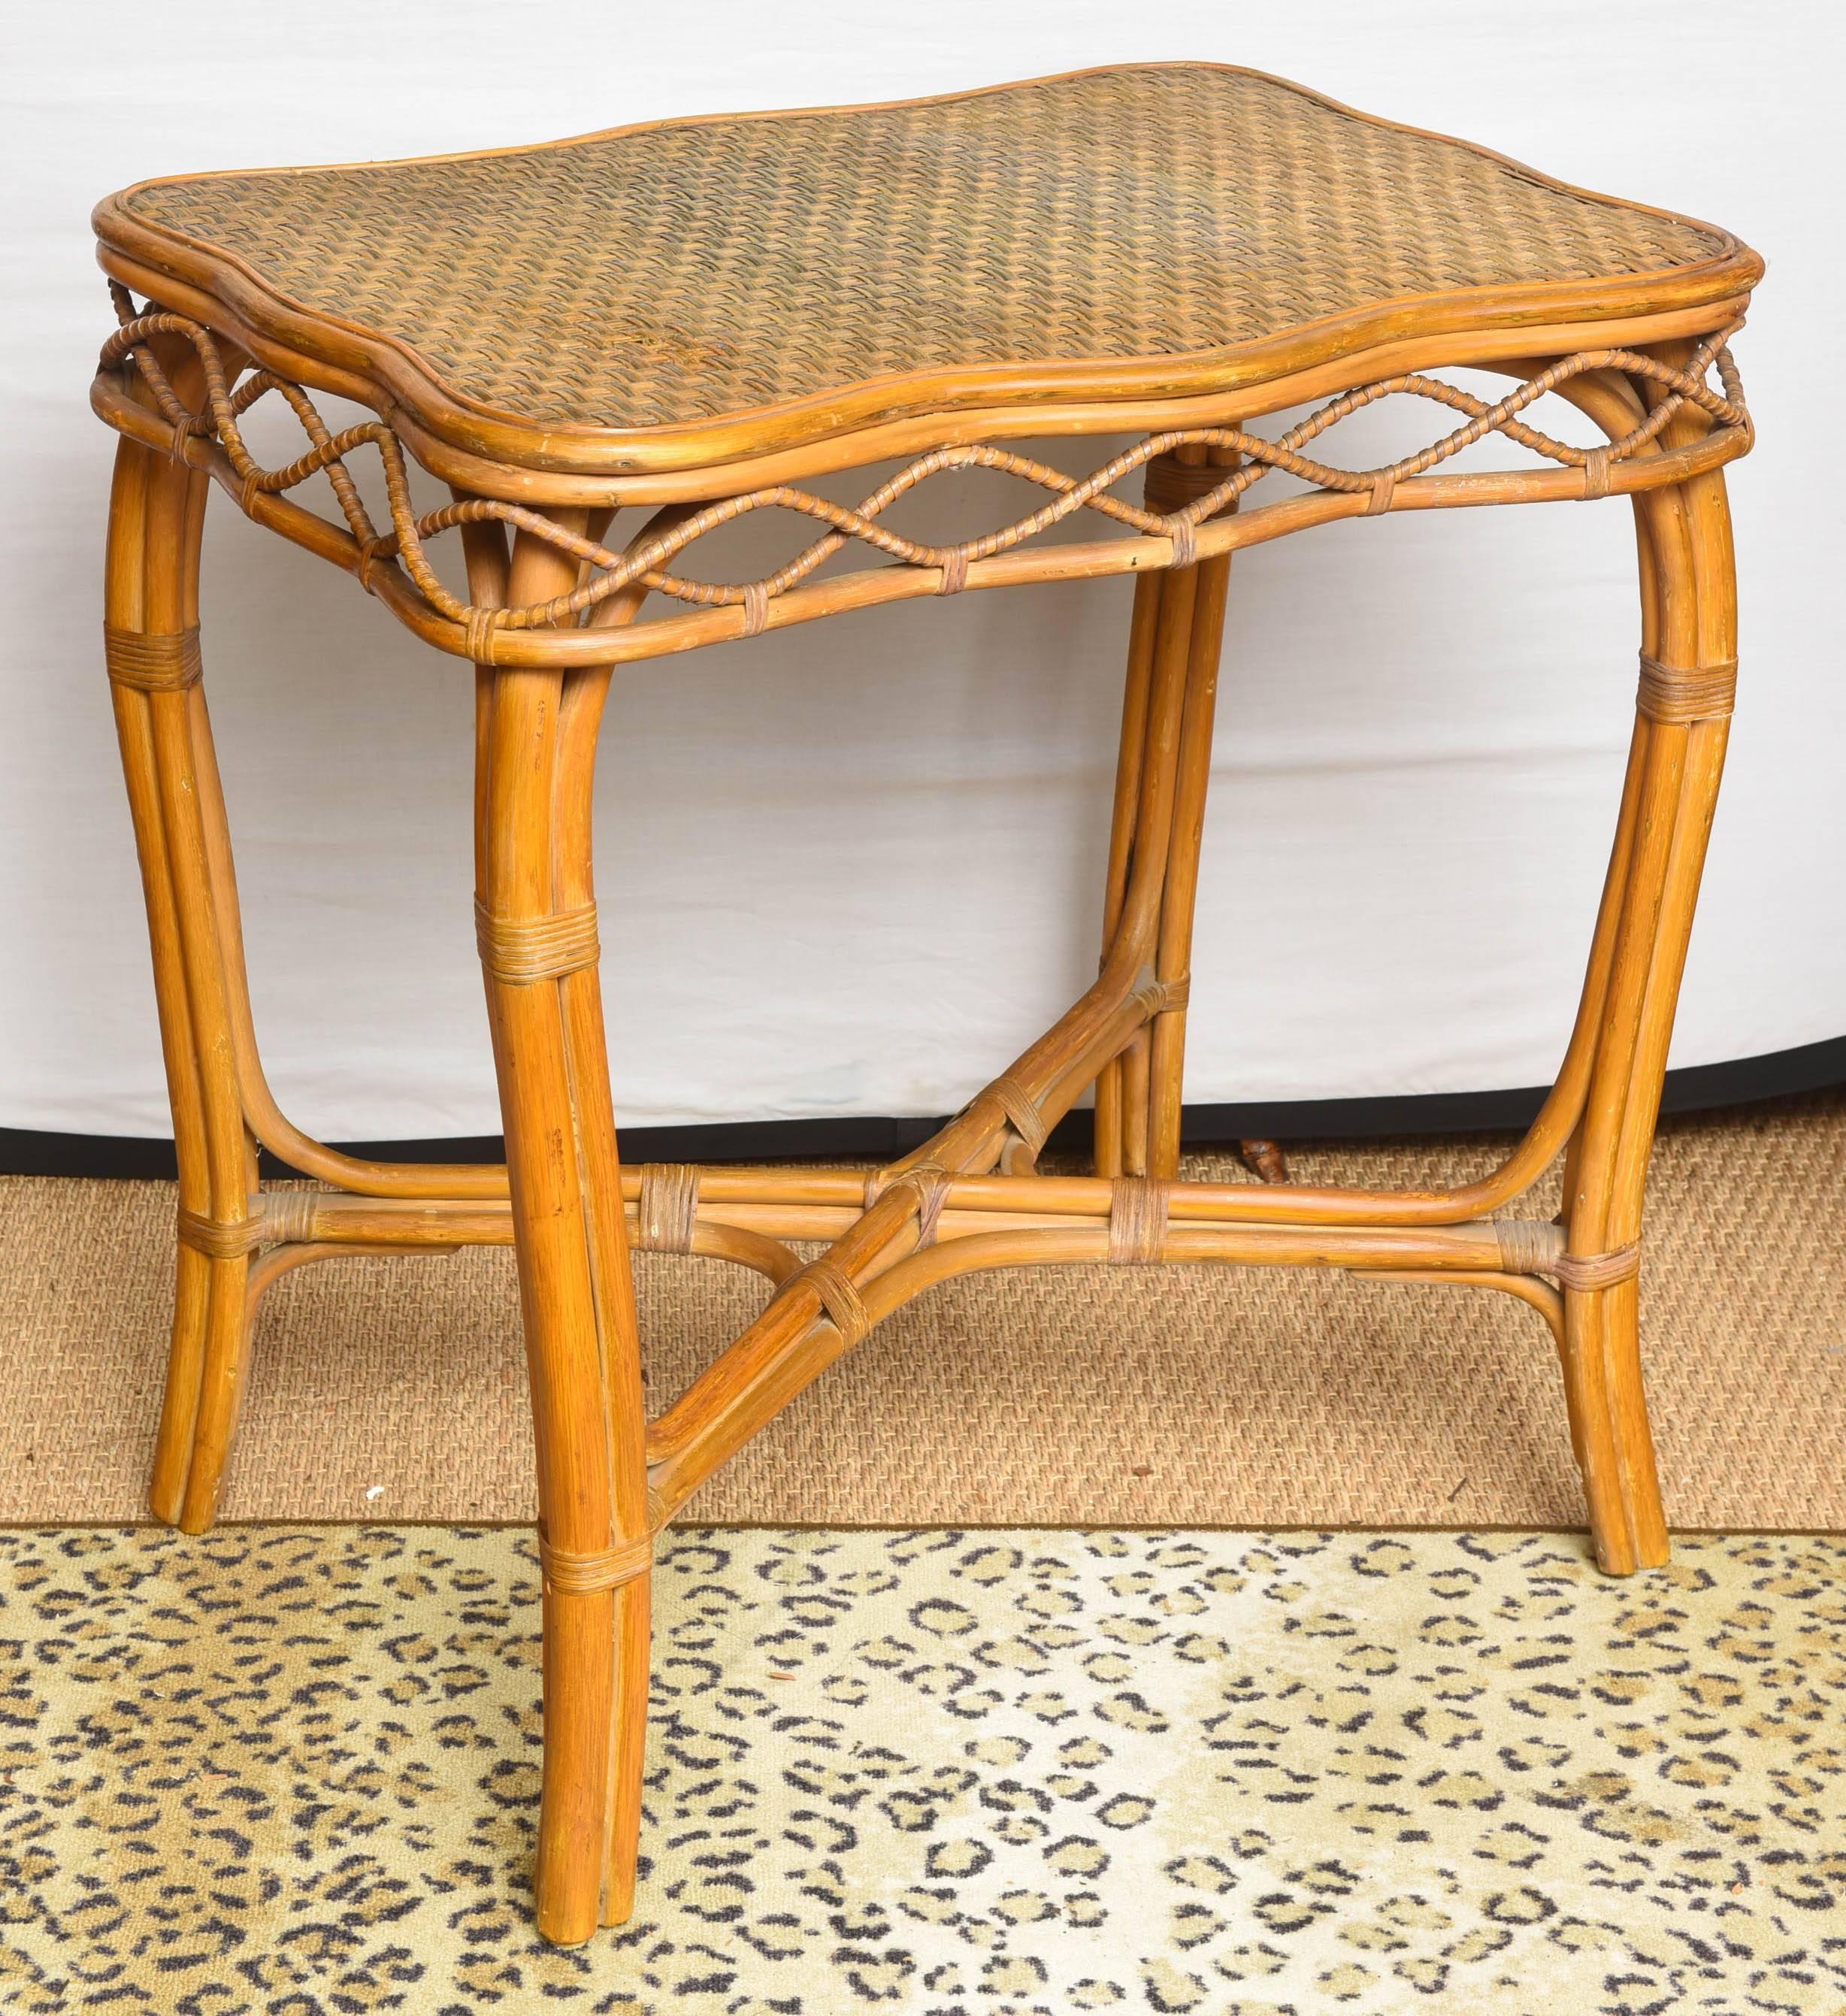 Set of Very Unusual French Vintage Rattan Table and Chair 5